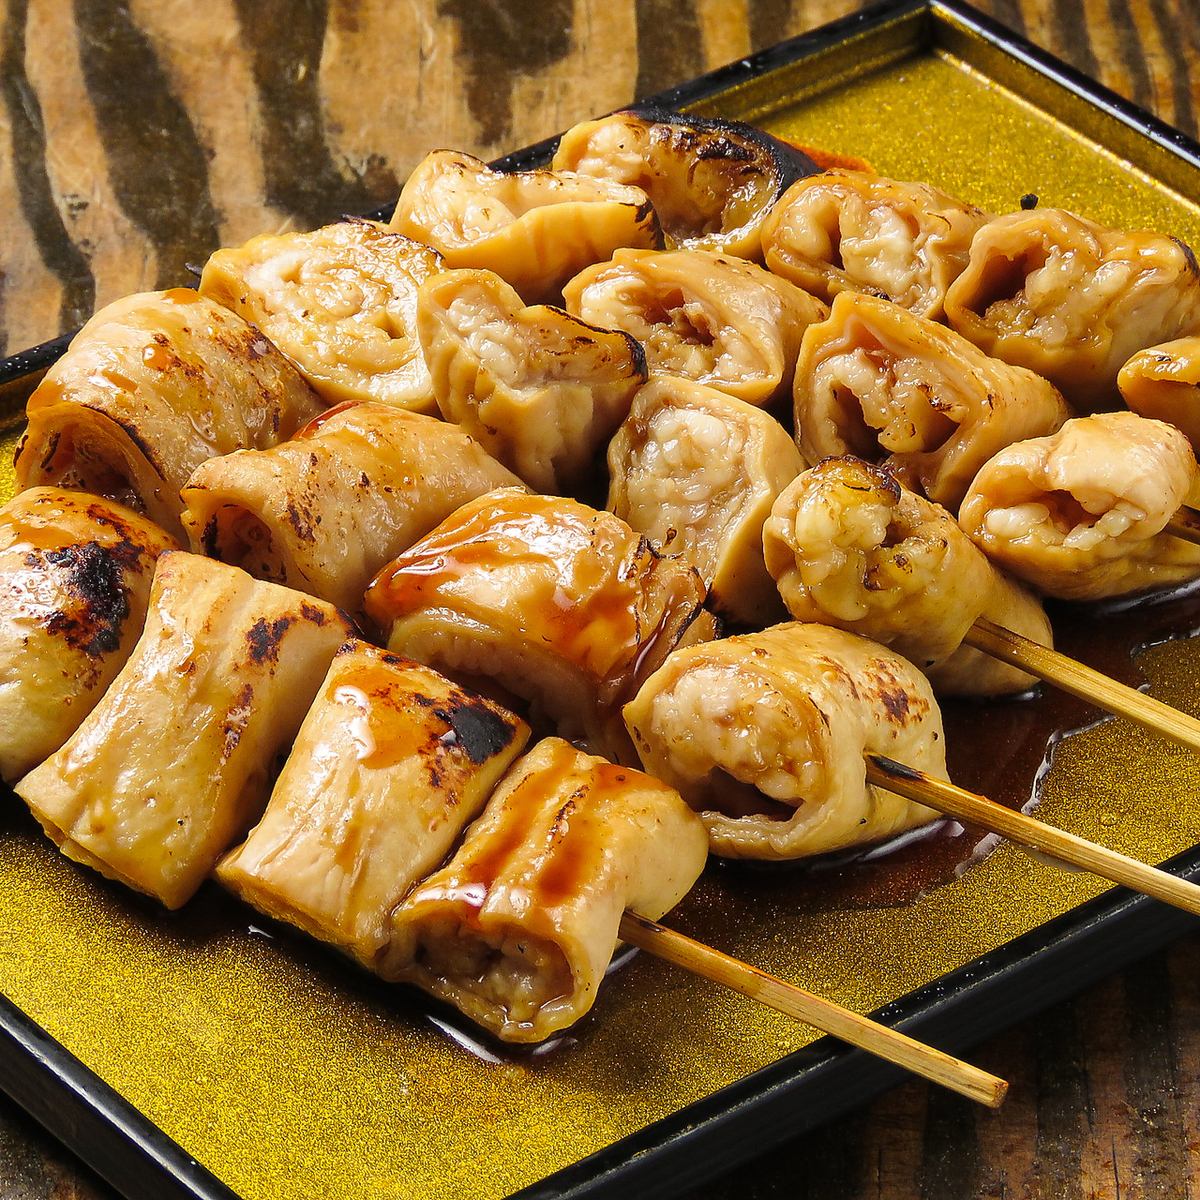 Please try Junpu's proud charcoal grilled skewers!